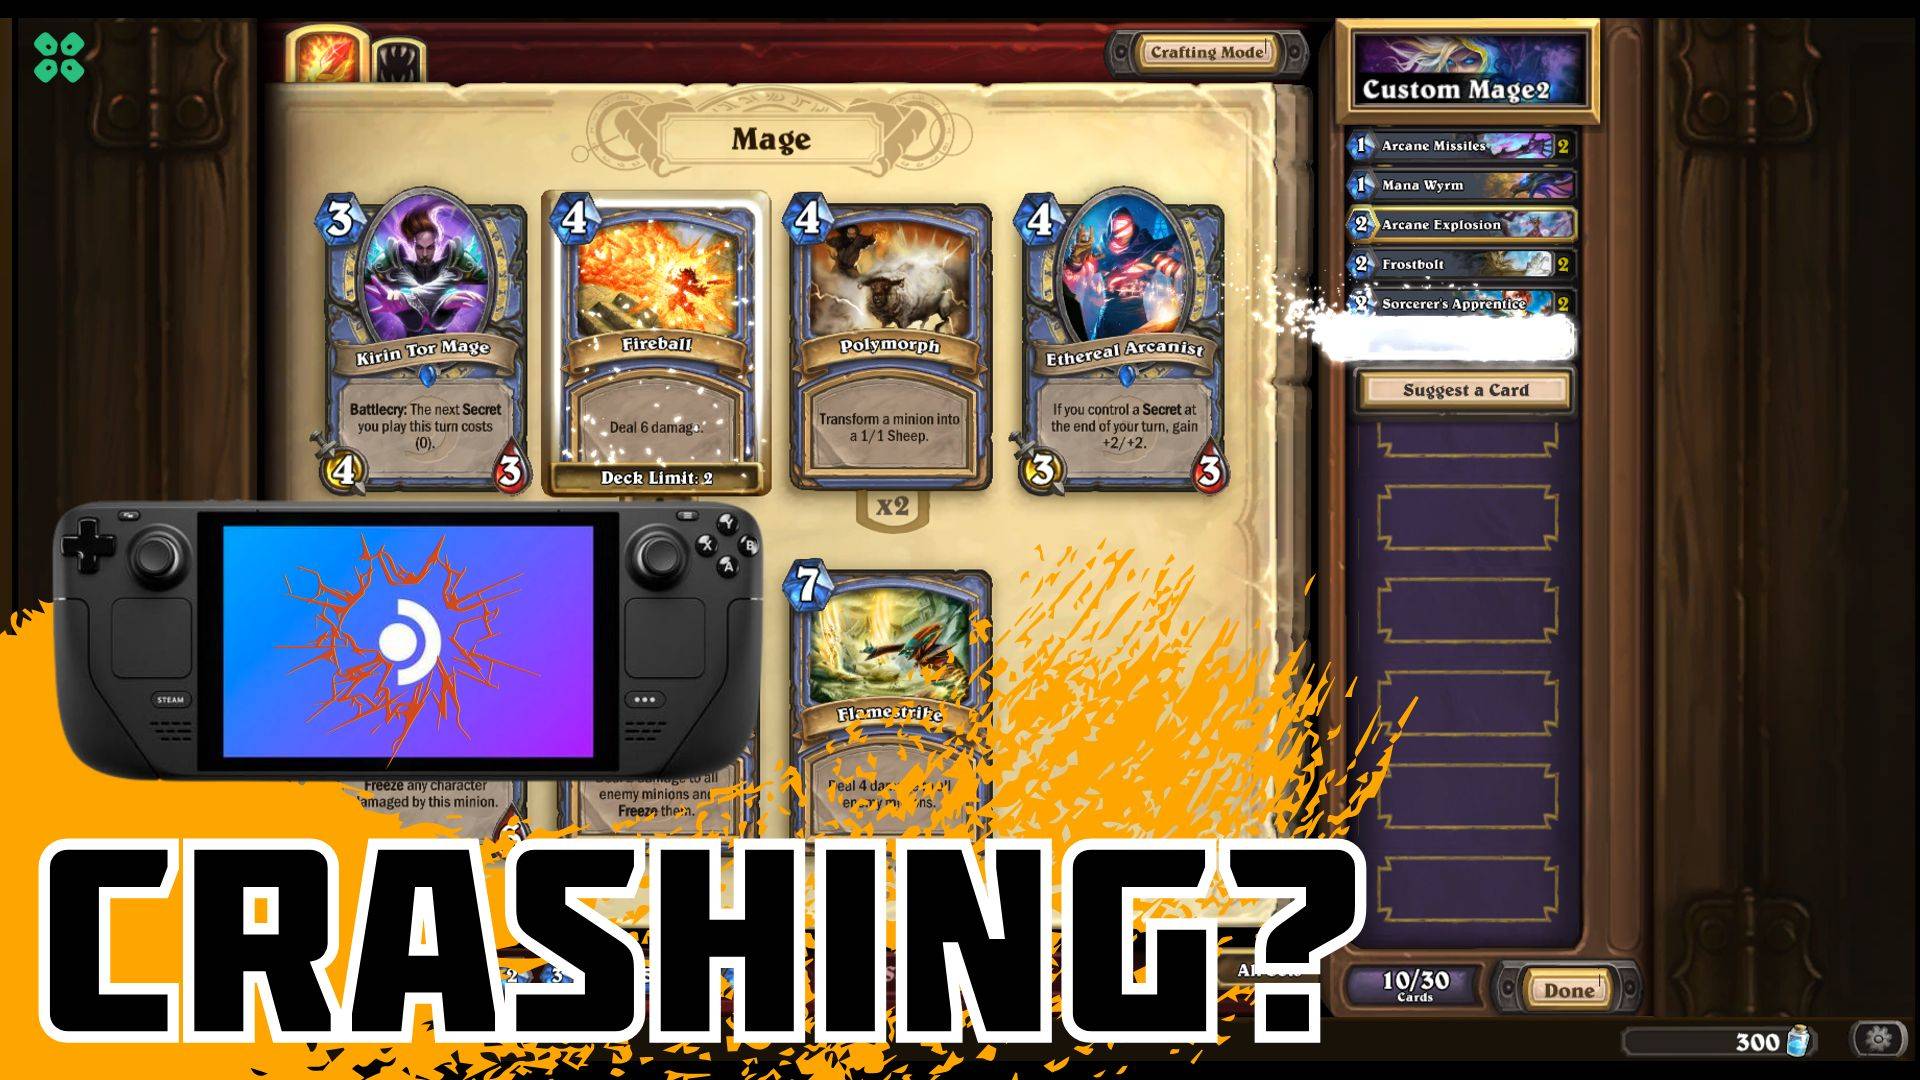 Artwork of Hearthstone and its fix of crashing by TCG